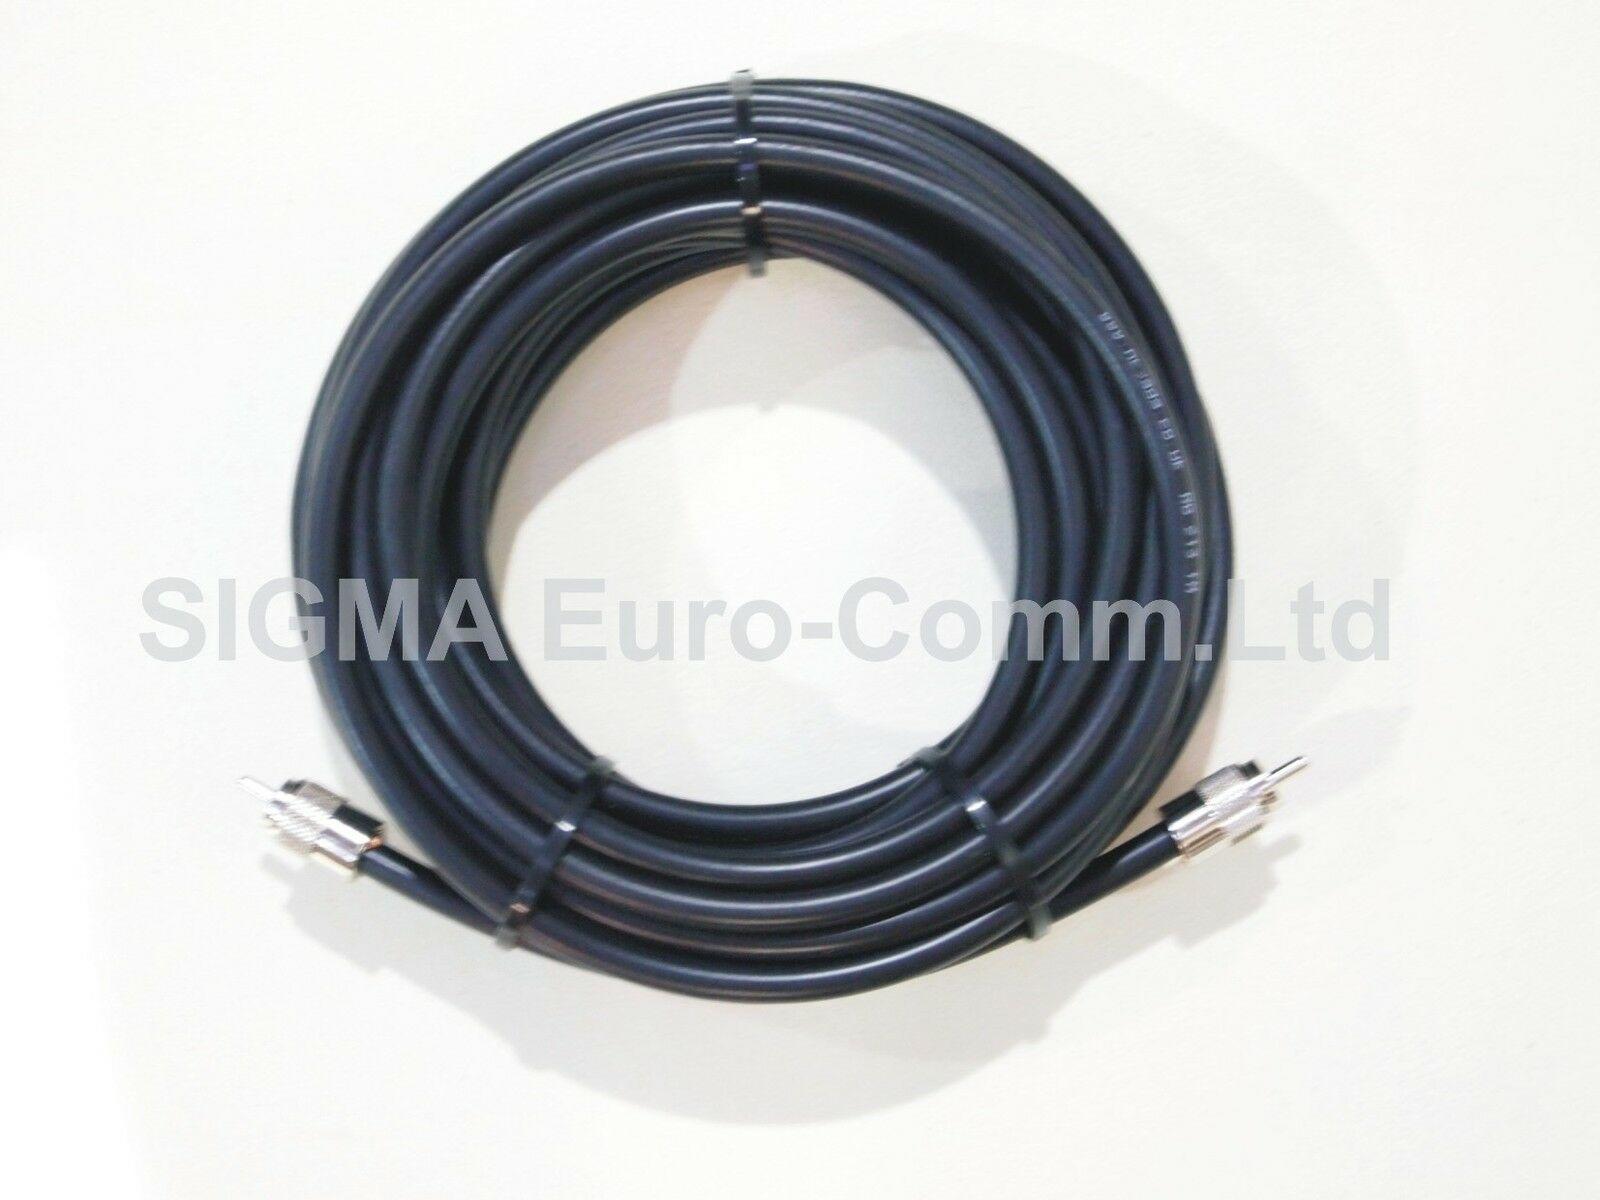 Sigma RG213 Low Loss 50 Ohm Coaxial Cable 25m Fitted With 2 x PL259 Male Connectors